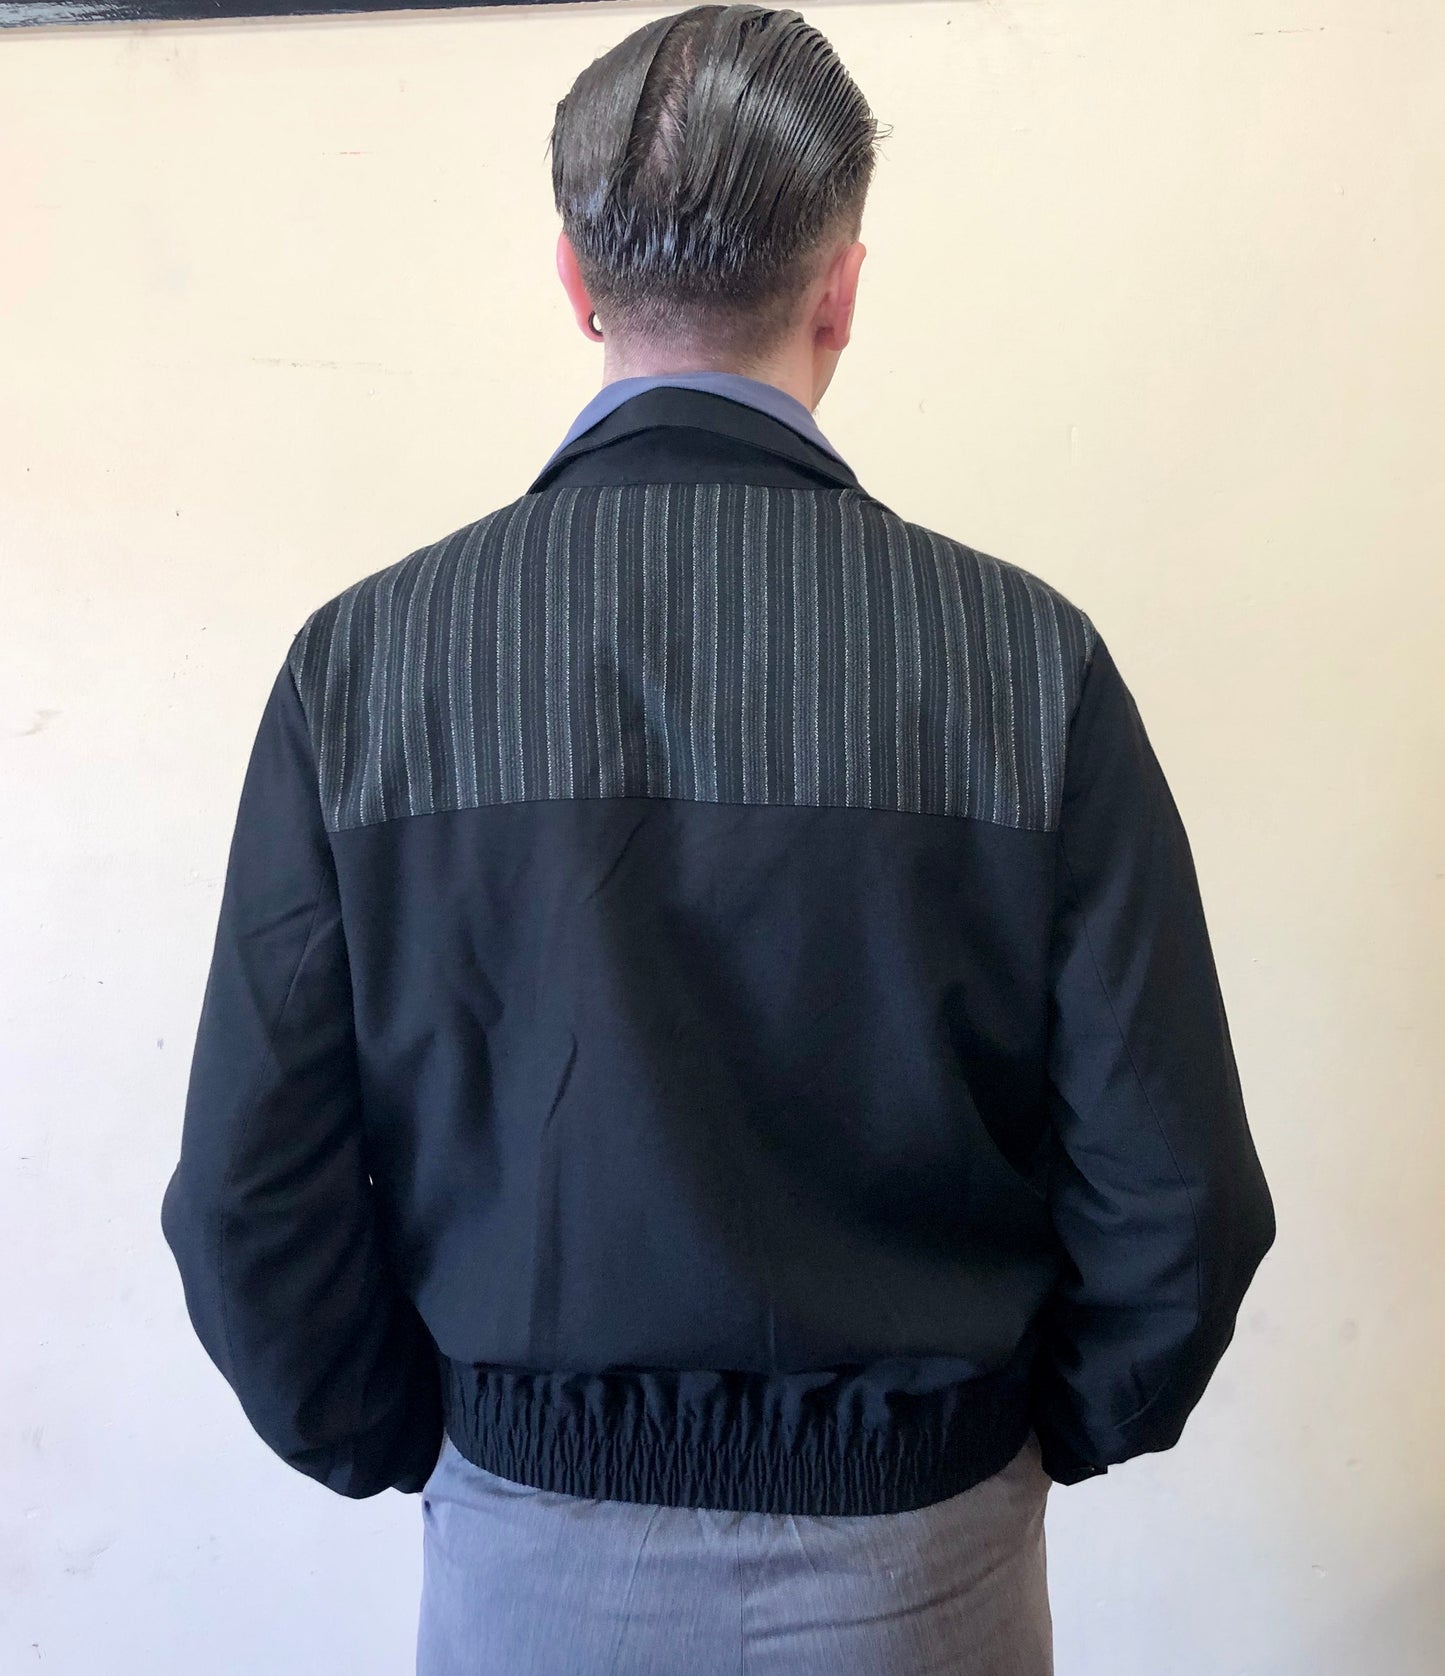 Mens 1950s vintage style gab jacket in black with silver lurex stripe XL only